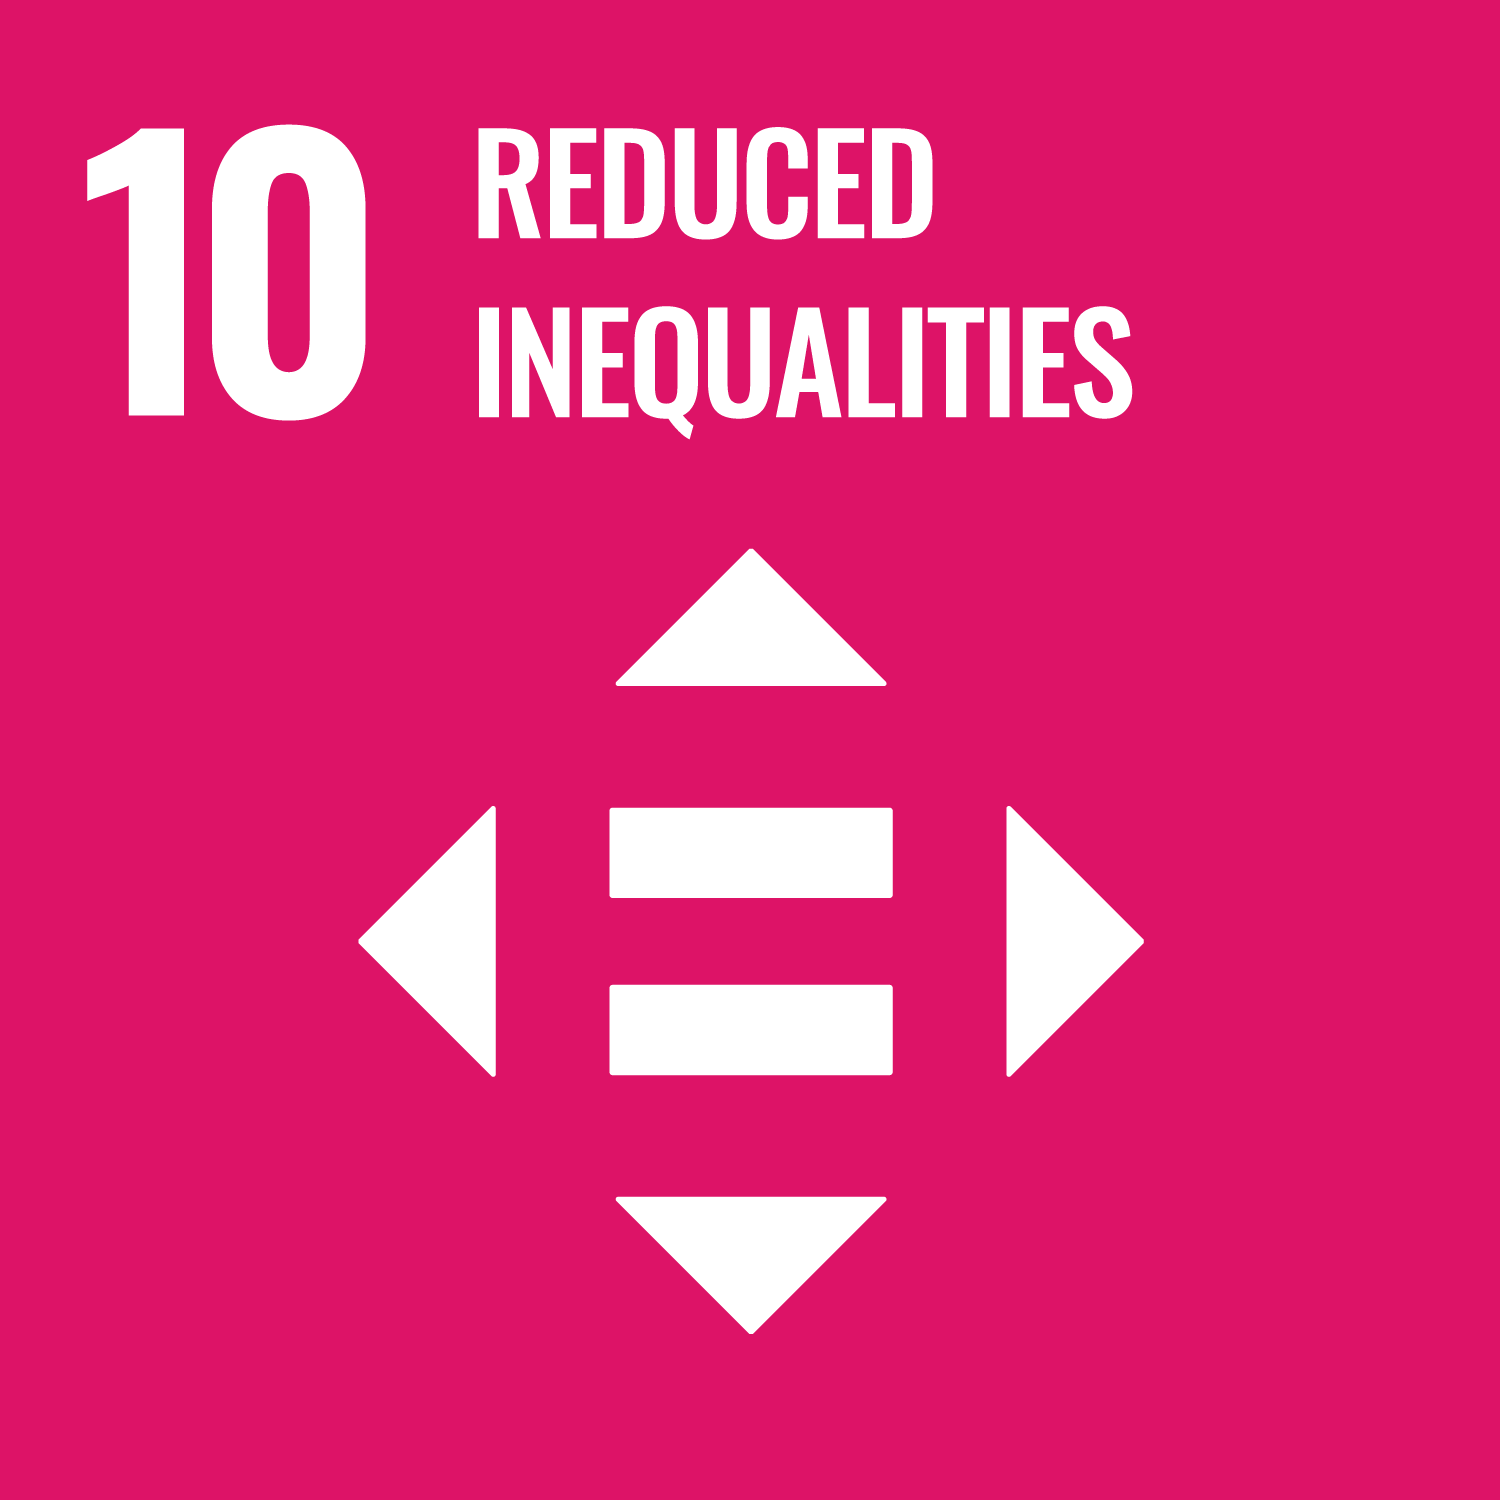 United Nation's 17 Sustainable Development Goals: Goal Number 10: Reduced Inequalities